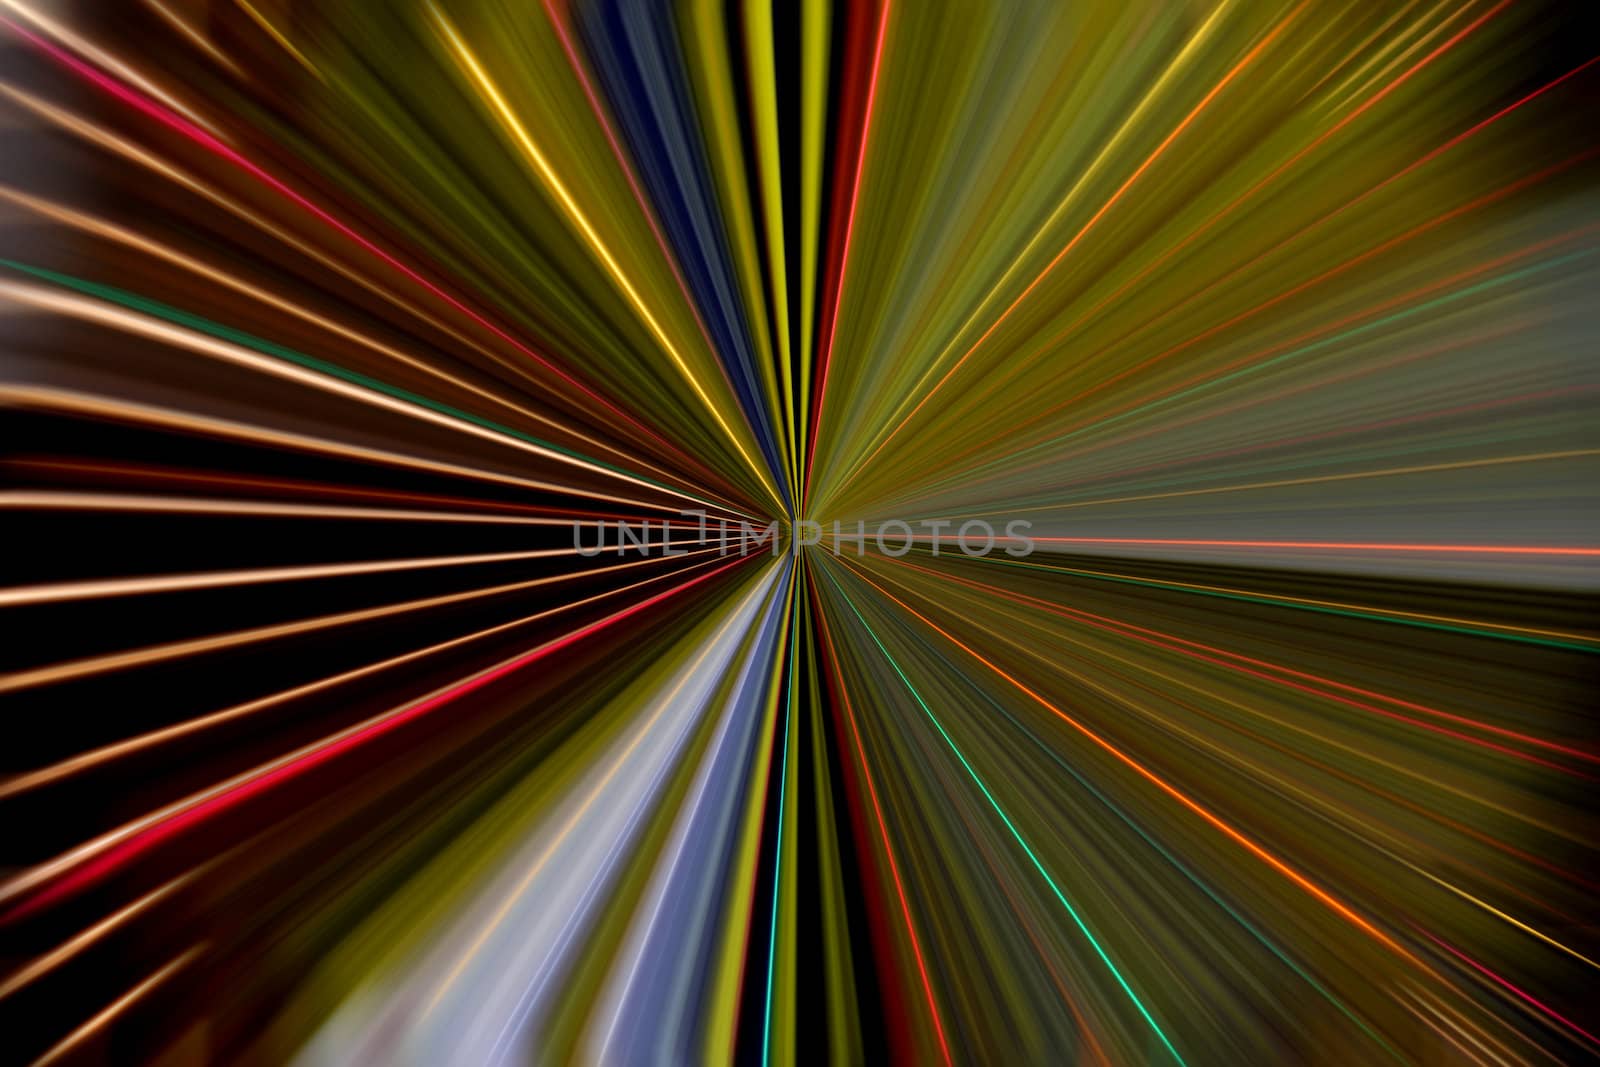 An abstract background with rays of colors speeding out from the center.